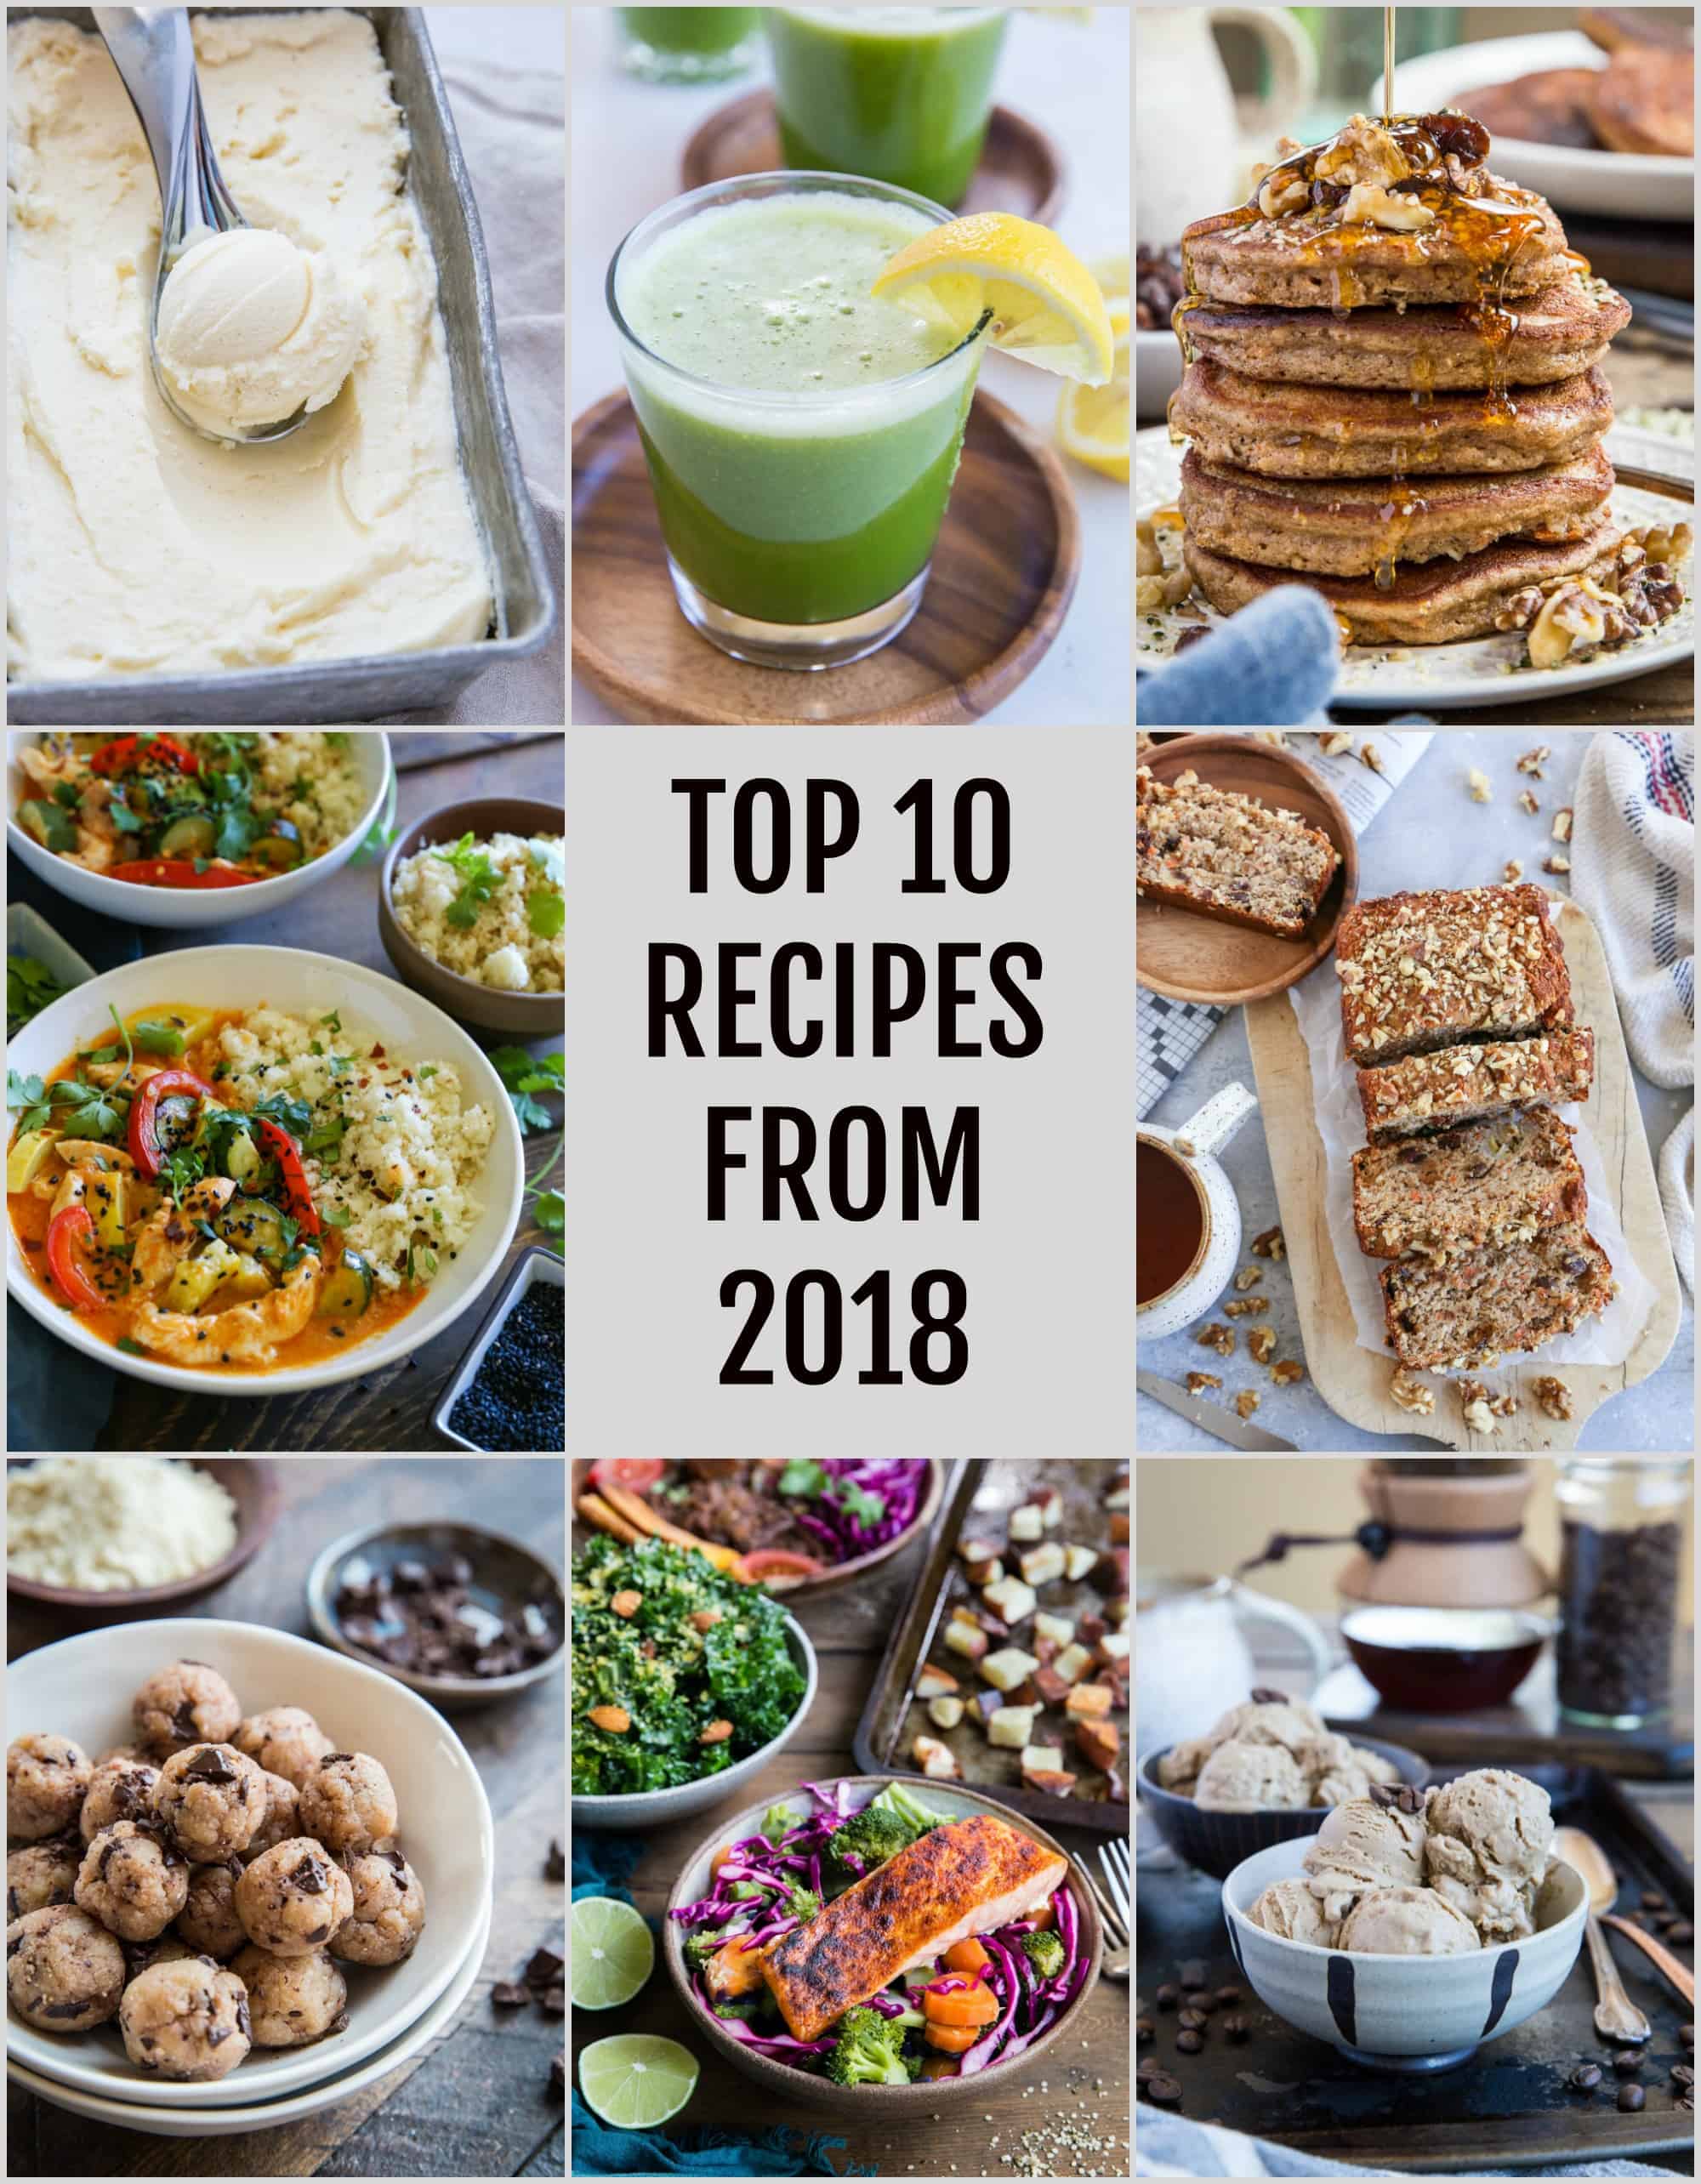 Top 10 Recipes from 2018 - TheRoastedRoot.com